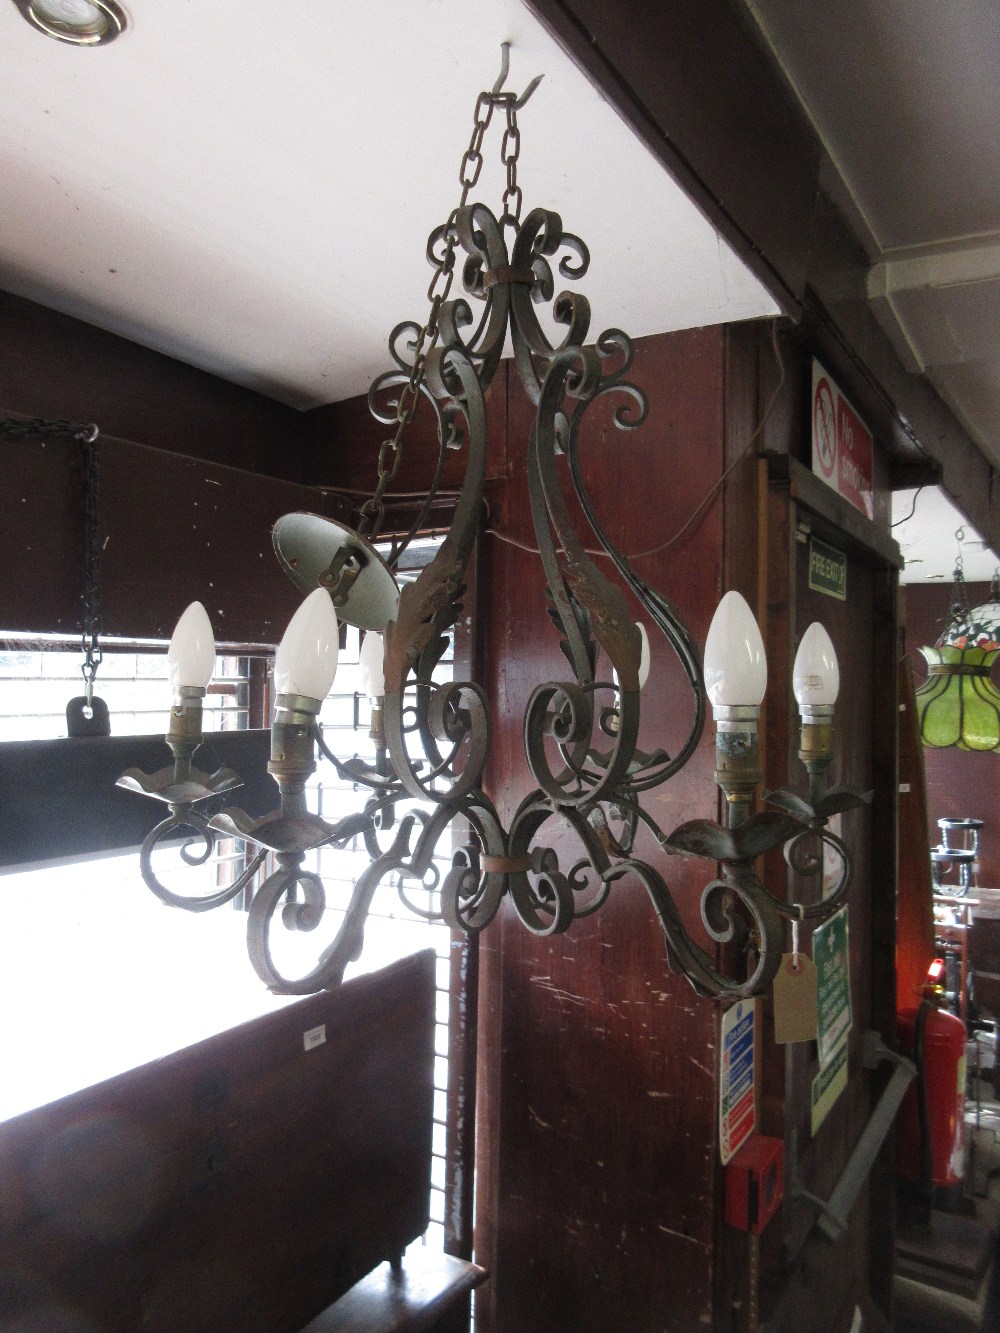 Wrought iron six branch chandelier with verdigris finish on long chain with matching ceiling rose